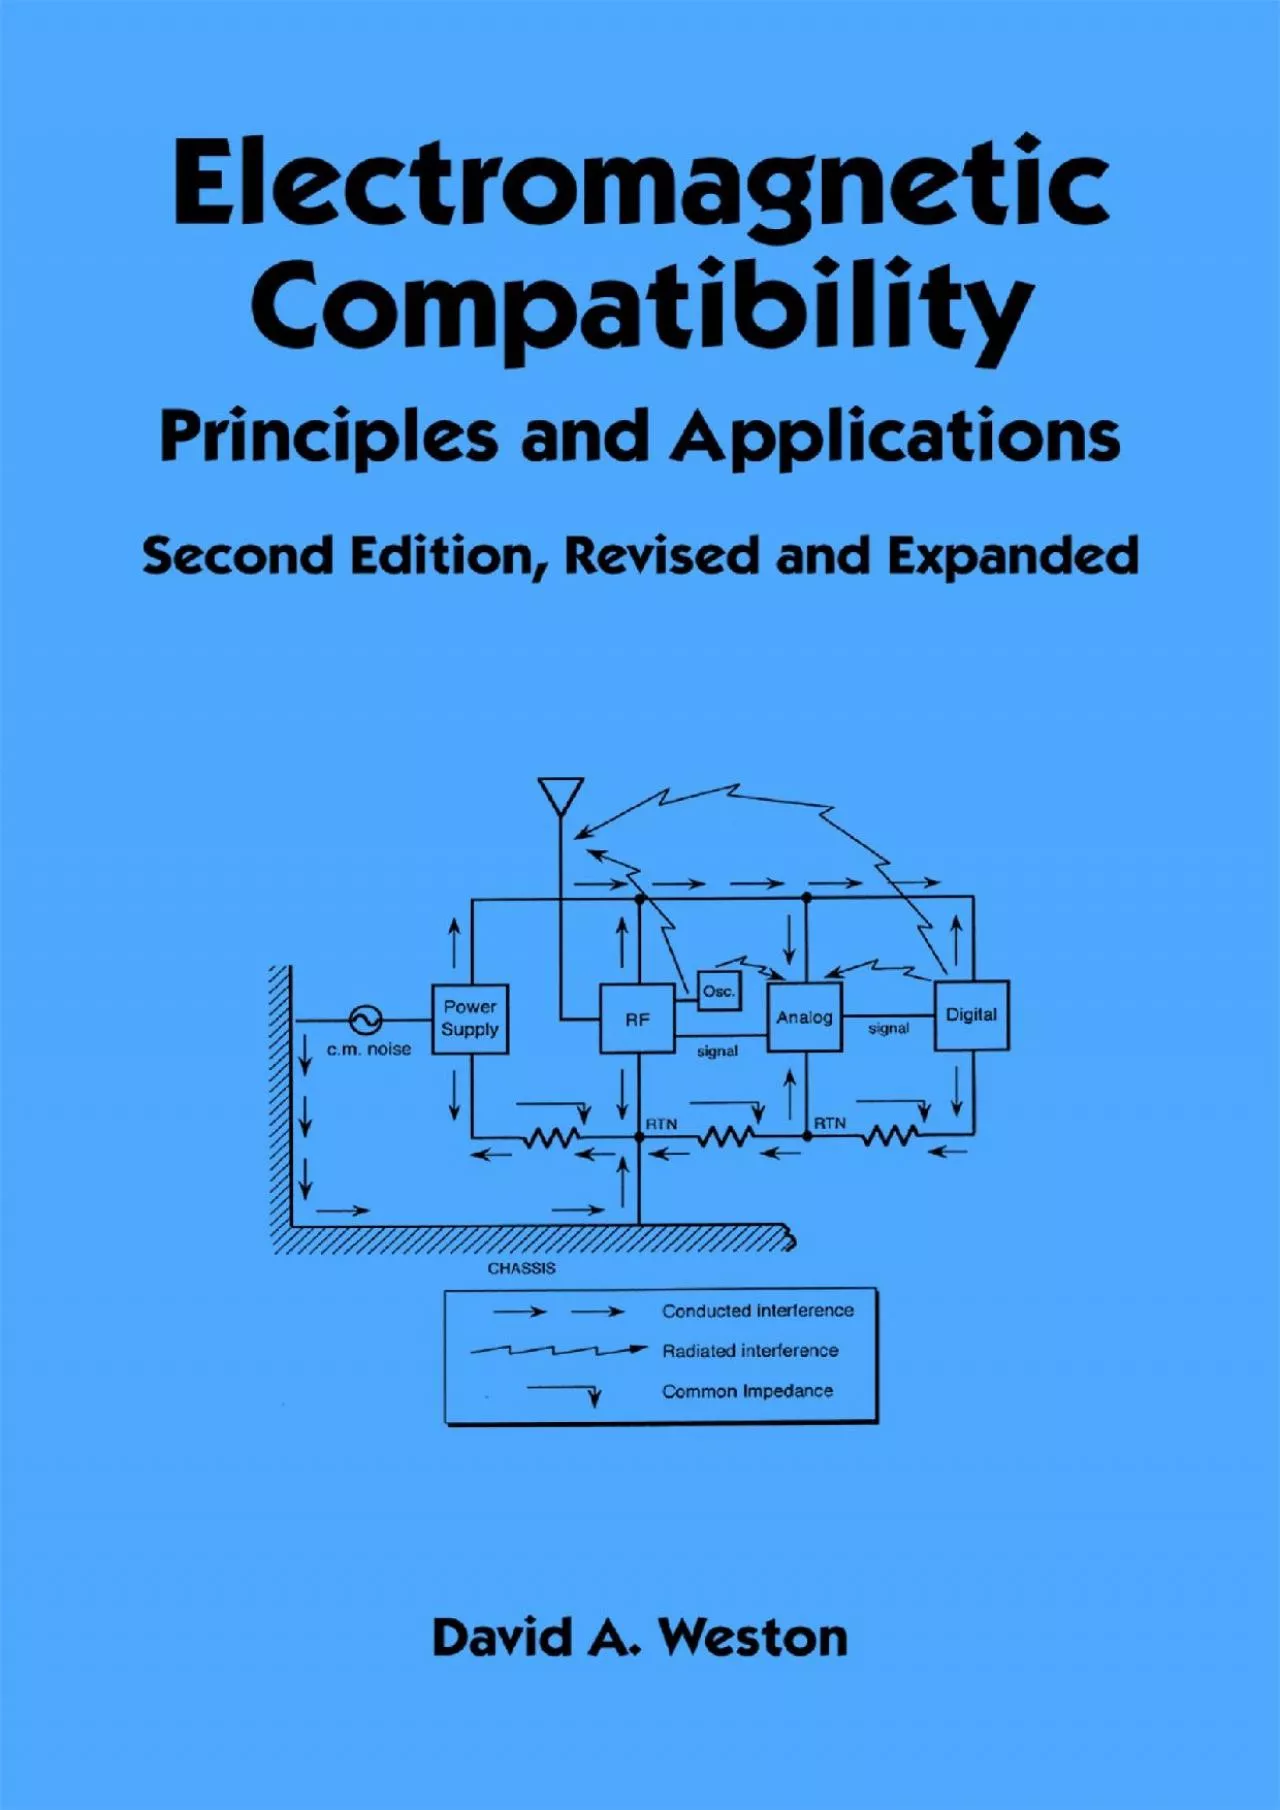 (BOOS)-Electromagnetic Compatibility: Principles and Applications, Second Edition, Revised